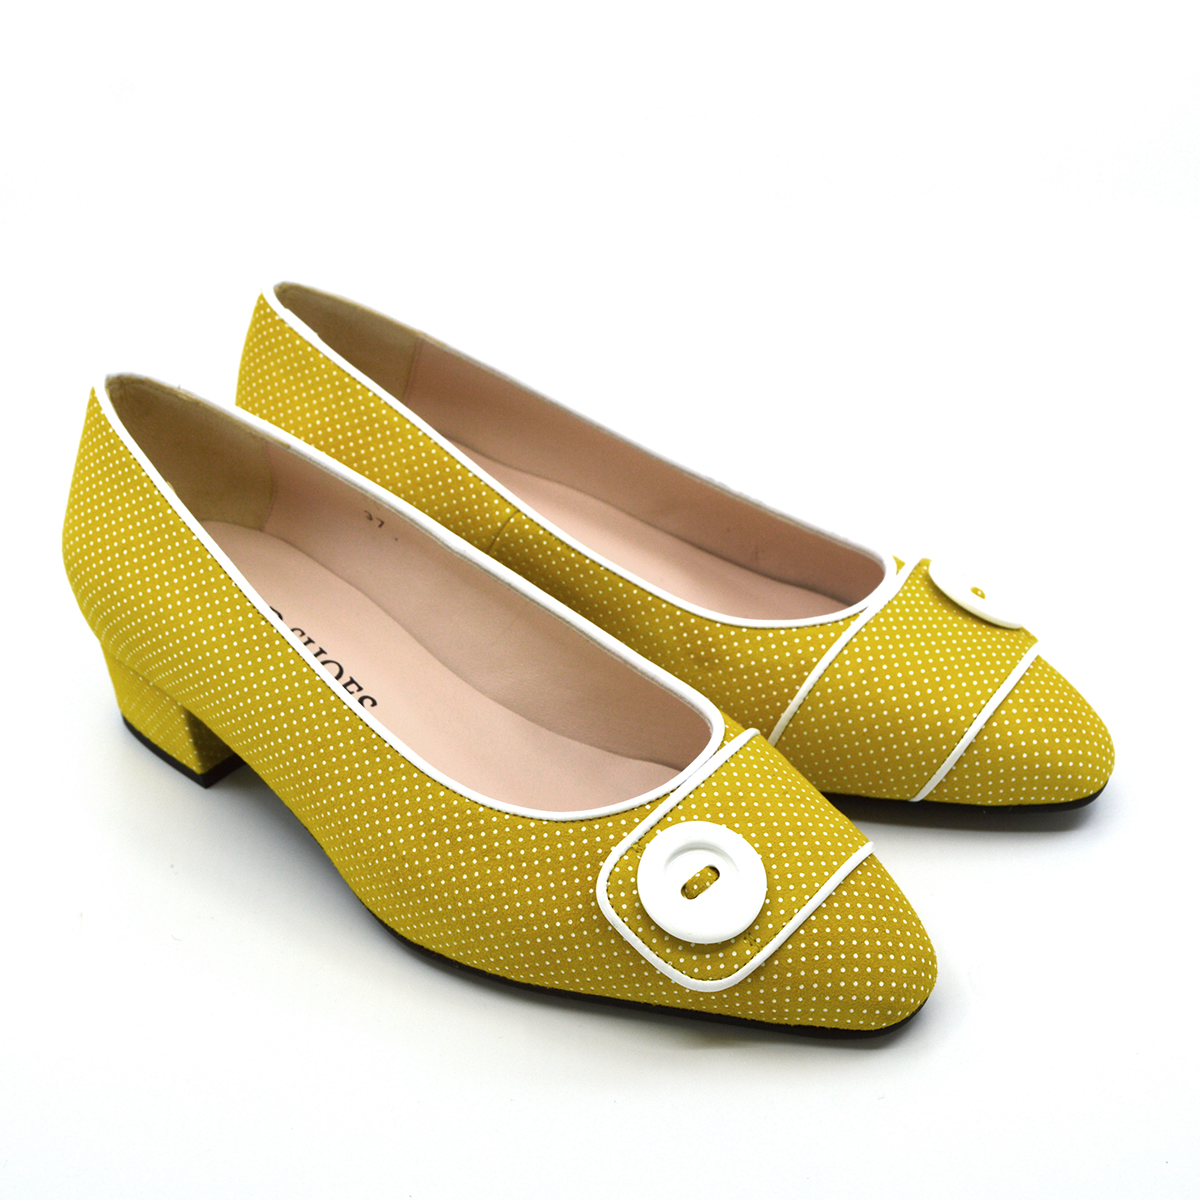 The Julia – Mustard Yellow Dotted Suede 